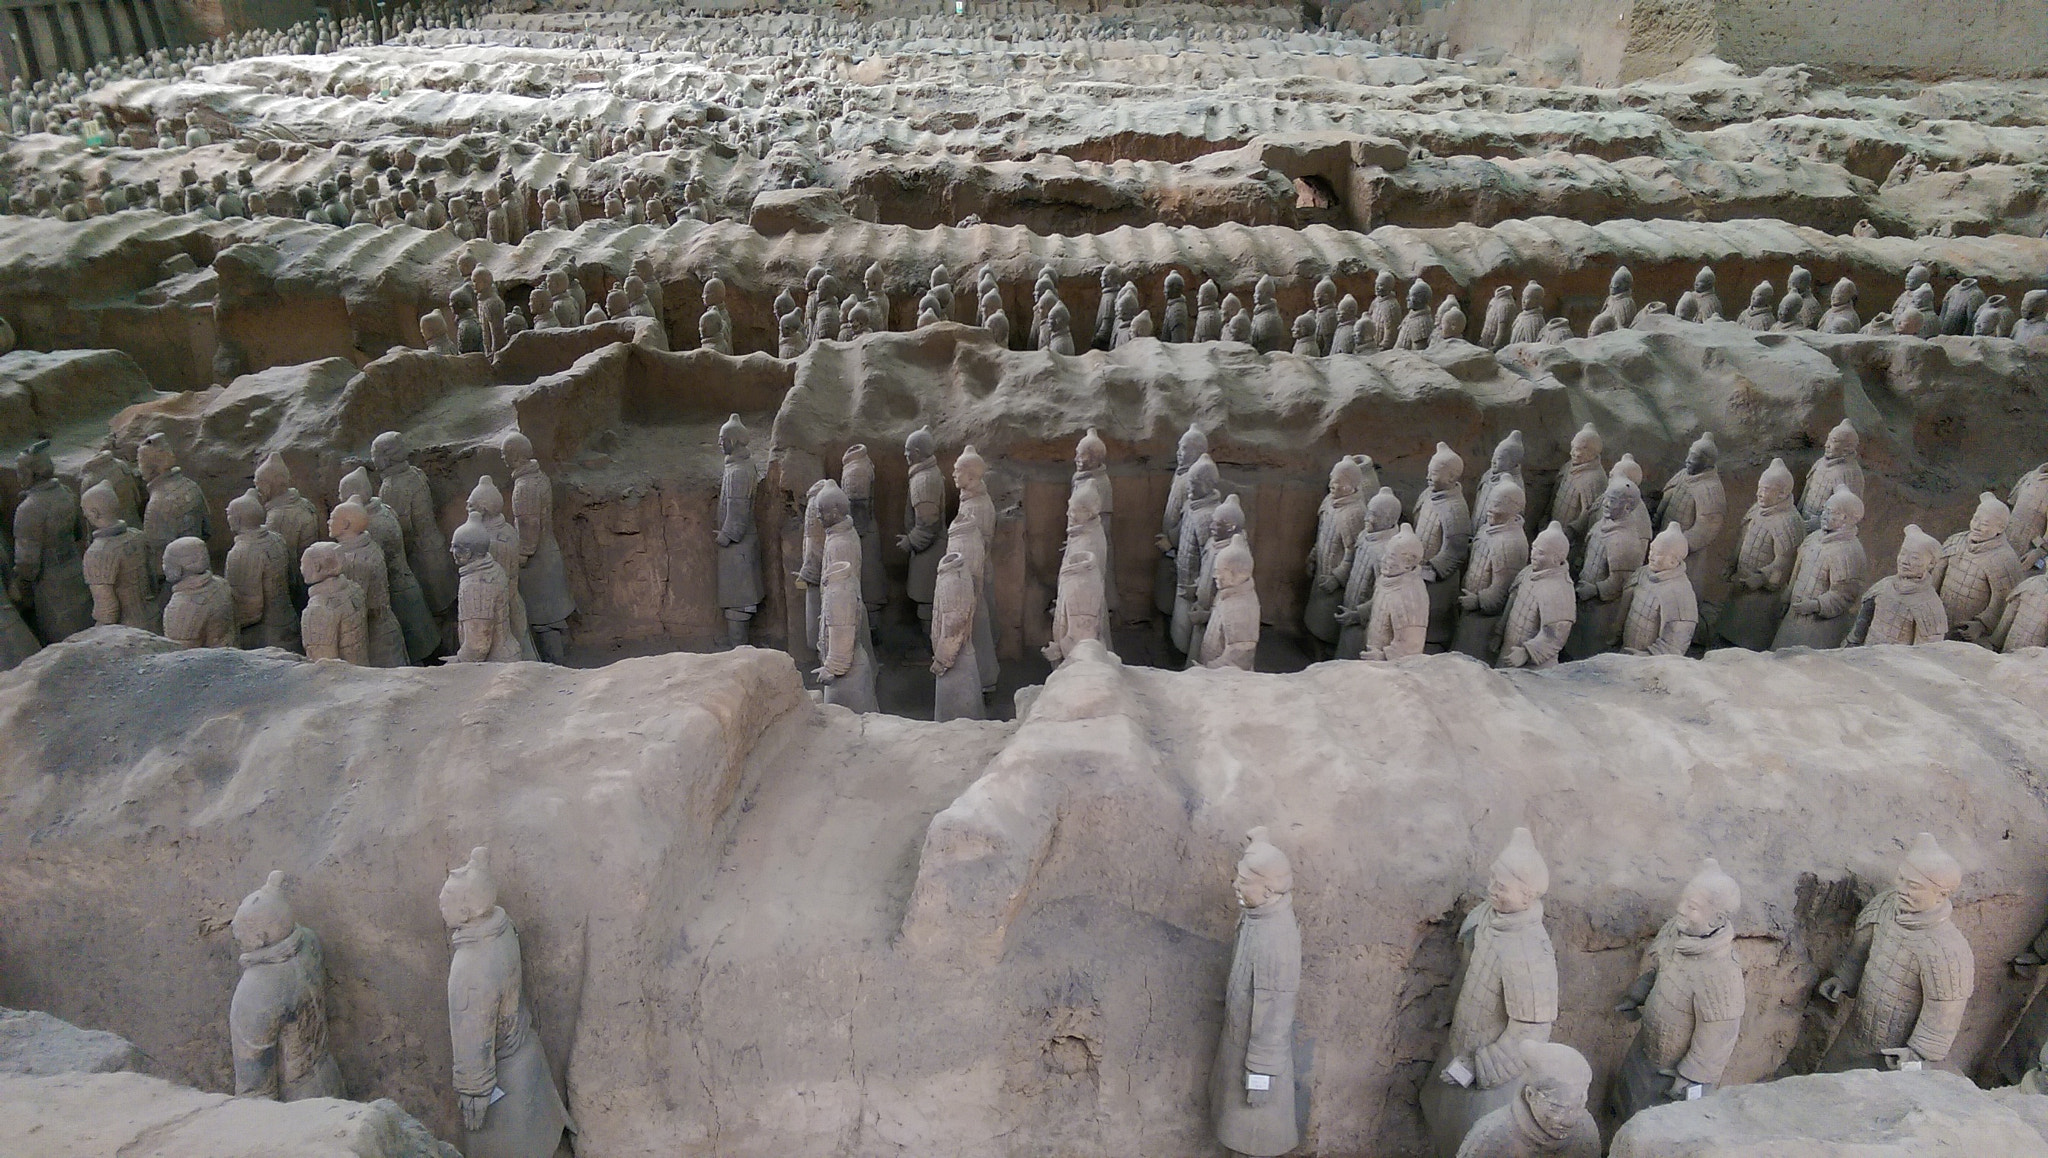 HTC ONE (M8) sample photo. Terracota army photography